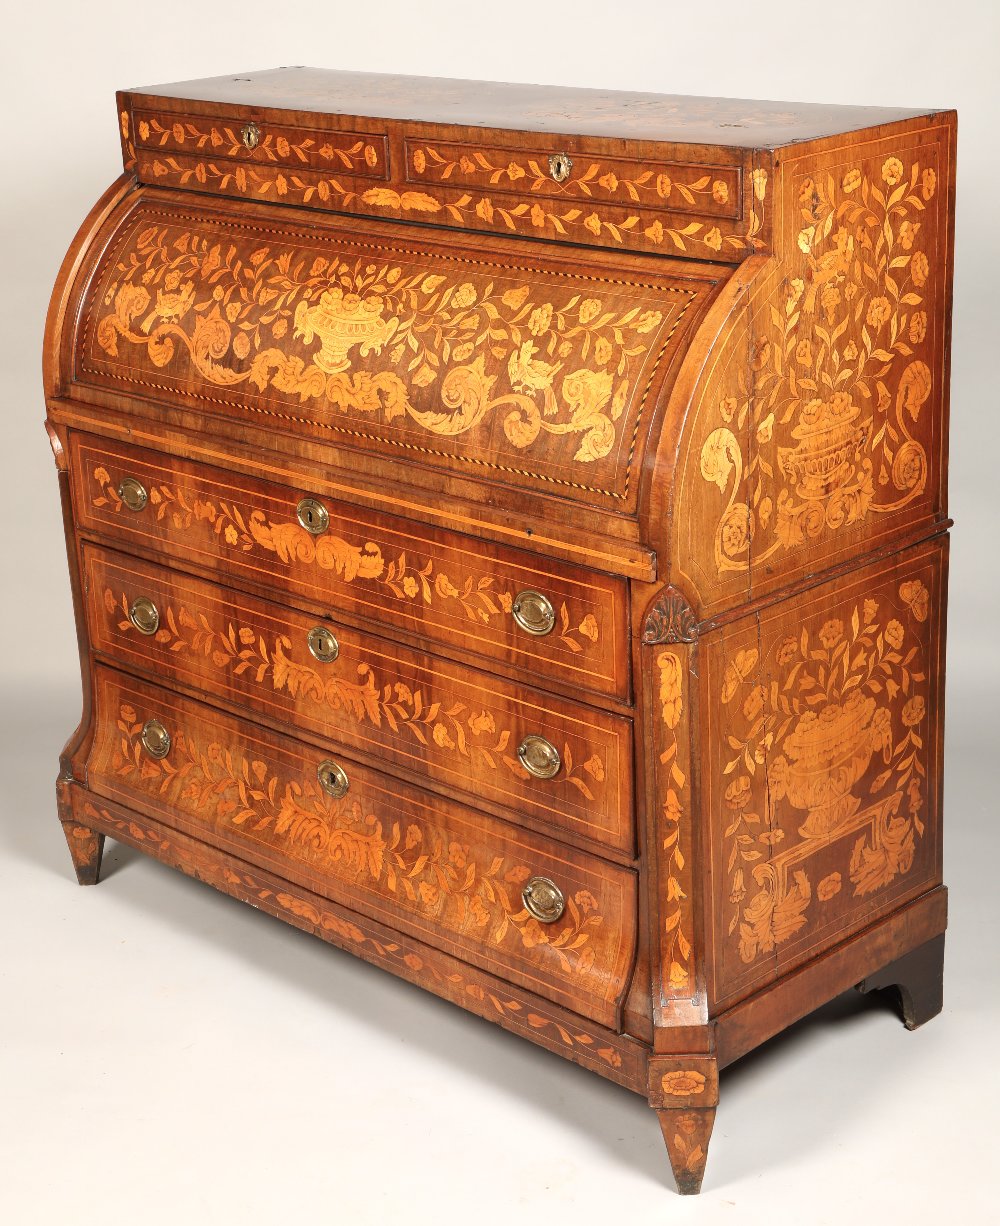 Dutch 19th century marquetry roll top chest, with three drawers, 124 x 123.5 x 57 cm